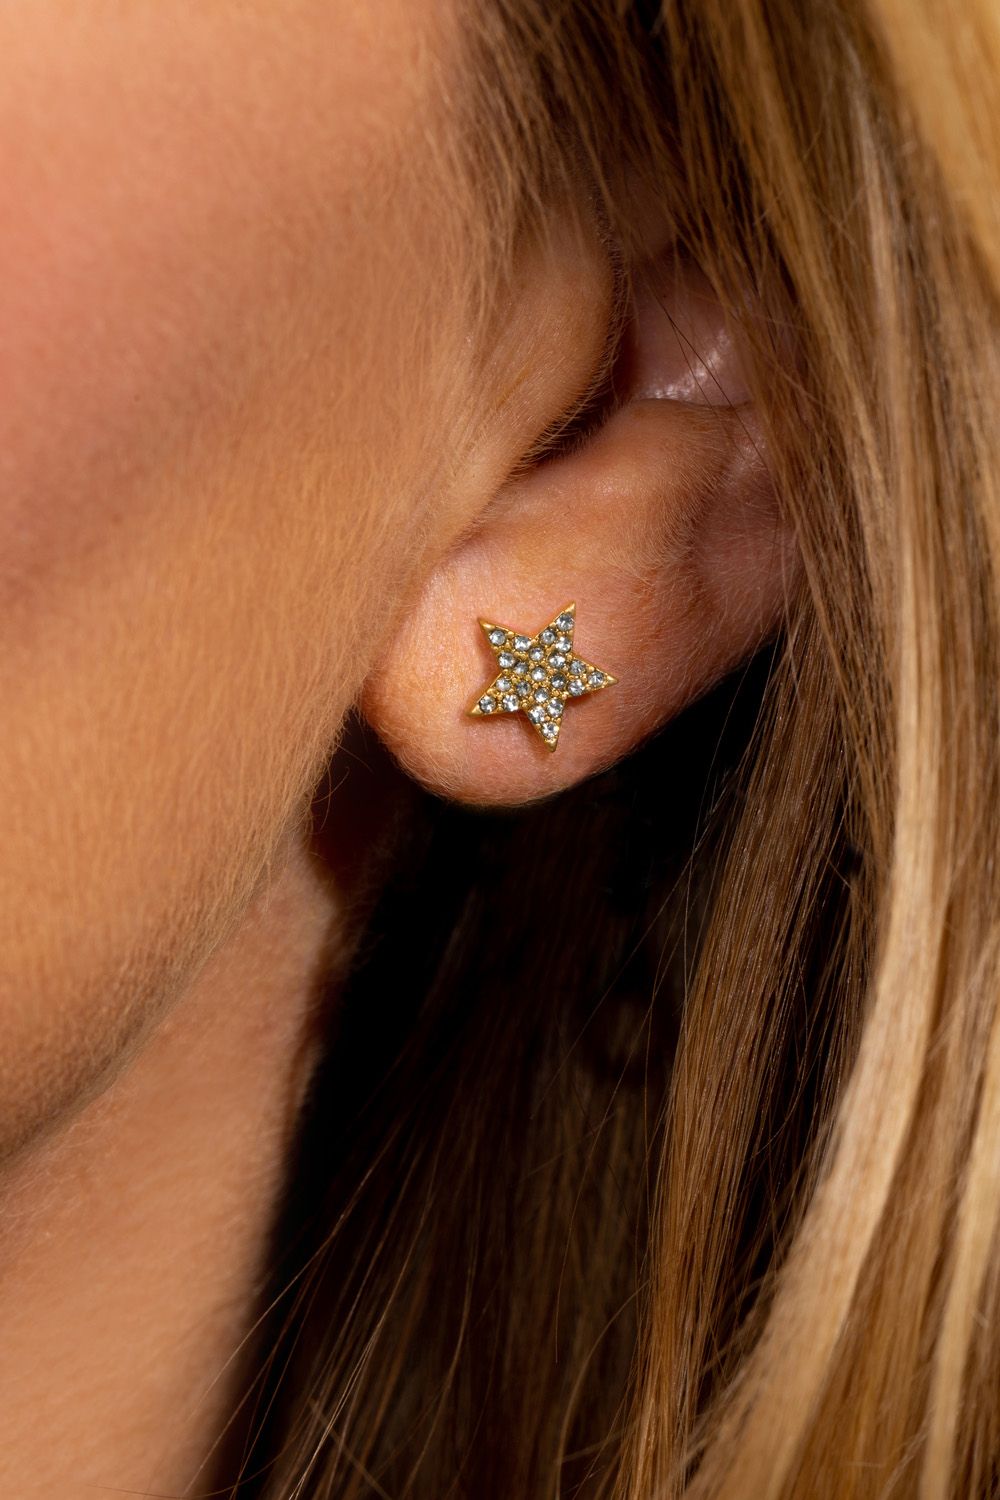 This might just be the cleverest earring design you ever did see! One earring, three ways to work it! First as a simple sparkling star stud, then simply attach the gorgeous cascading stars one of two ways, either behind or in front of the ear for two glammed up looks that are bang on trend this  season. These gold plated star earrings move delicately and shimmer in the light, and can be teamed as a set with the matching Sparkling Stars gold necklace and bracelet.